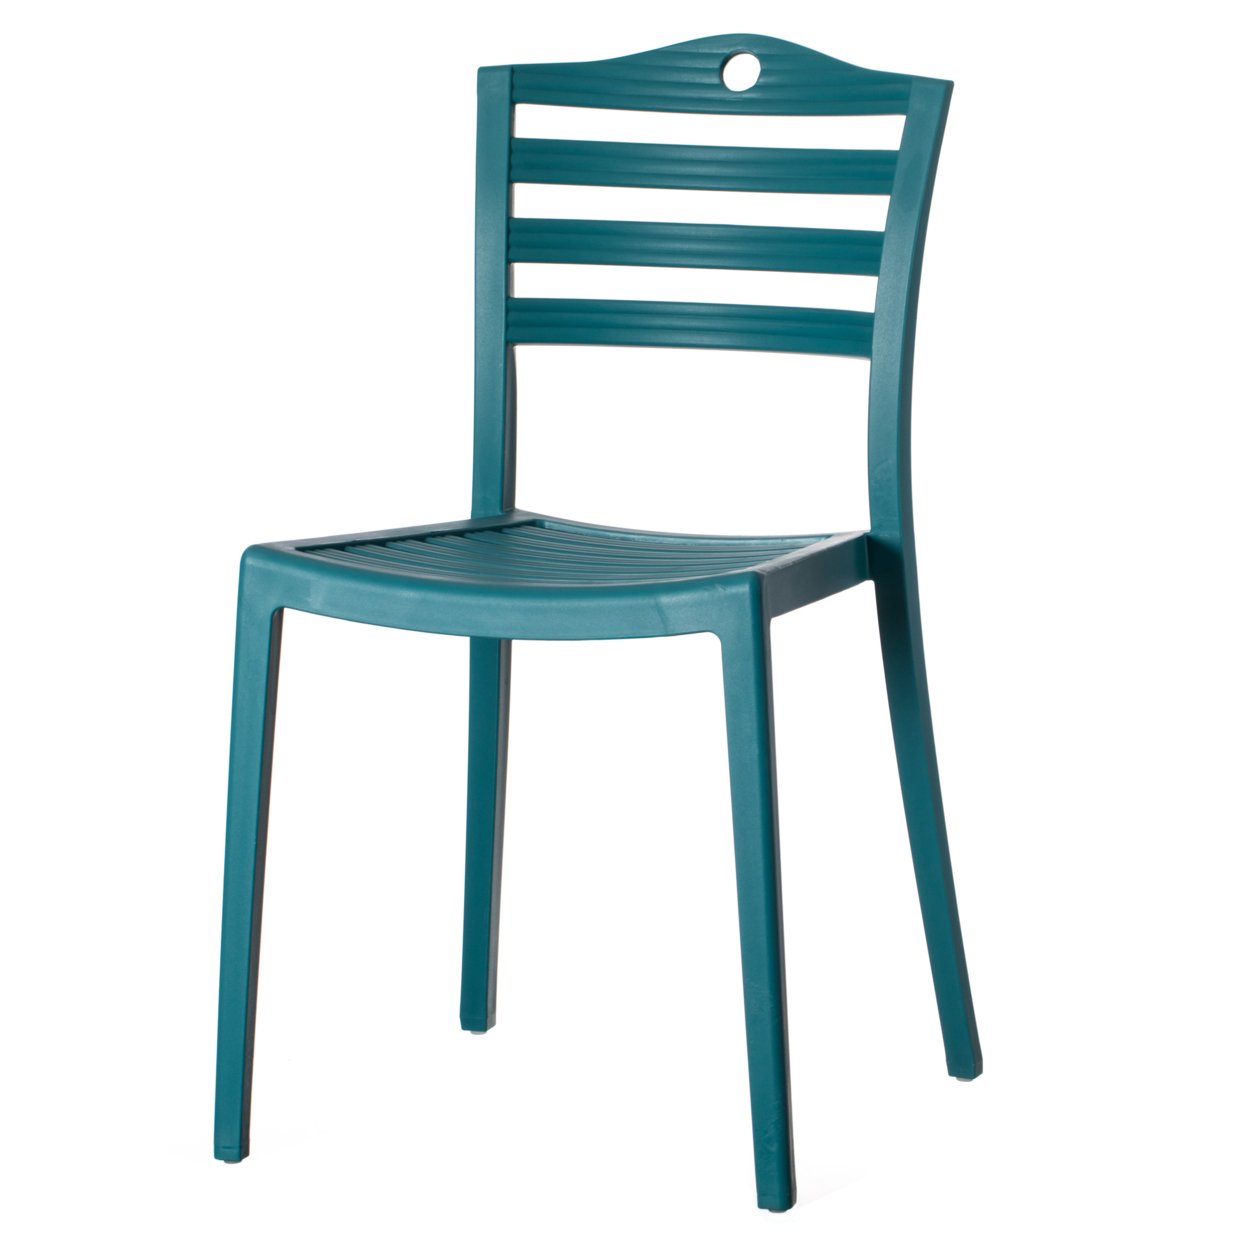 Stackable Modern Plastic Indoor And Outdoor Dining Chair With Ladderback Design For All Weather Use - Single Blue